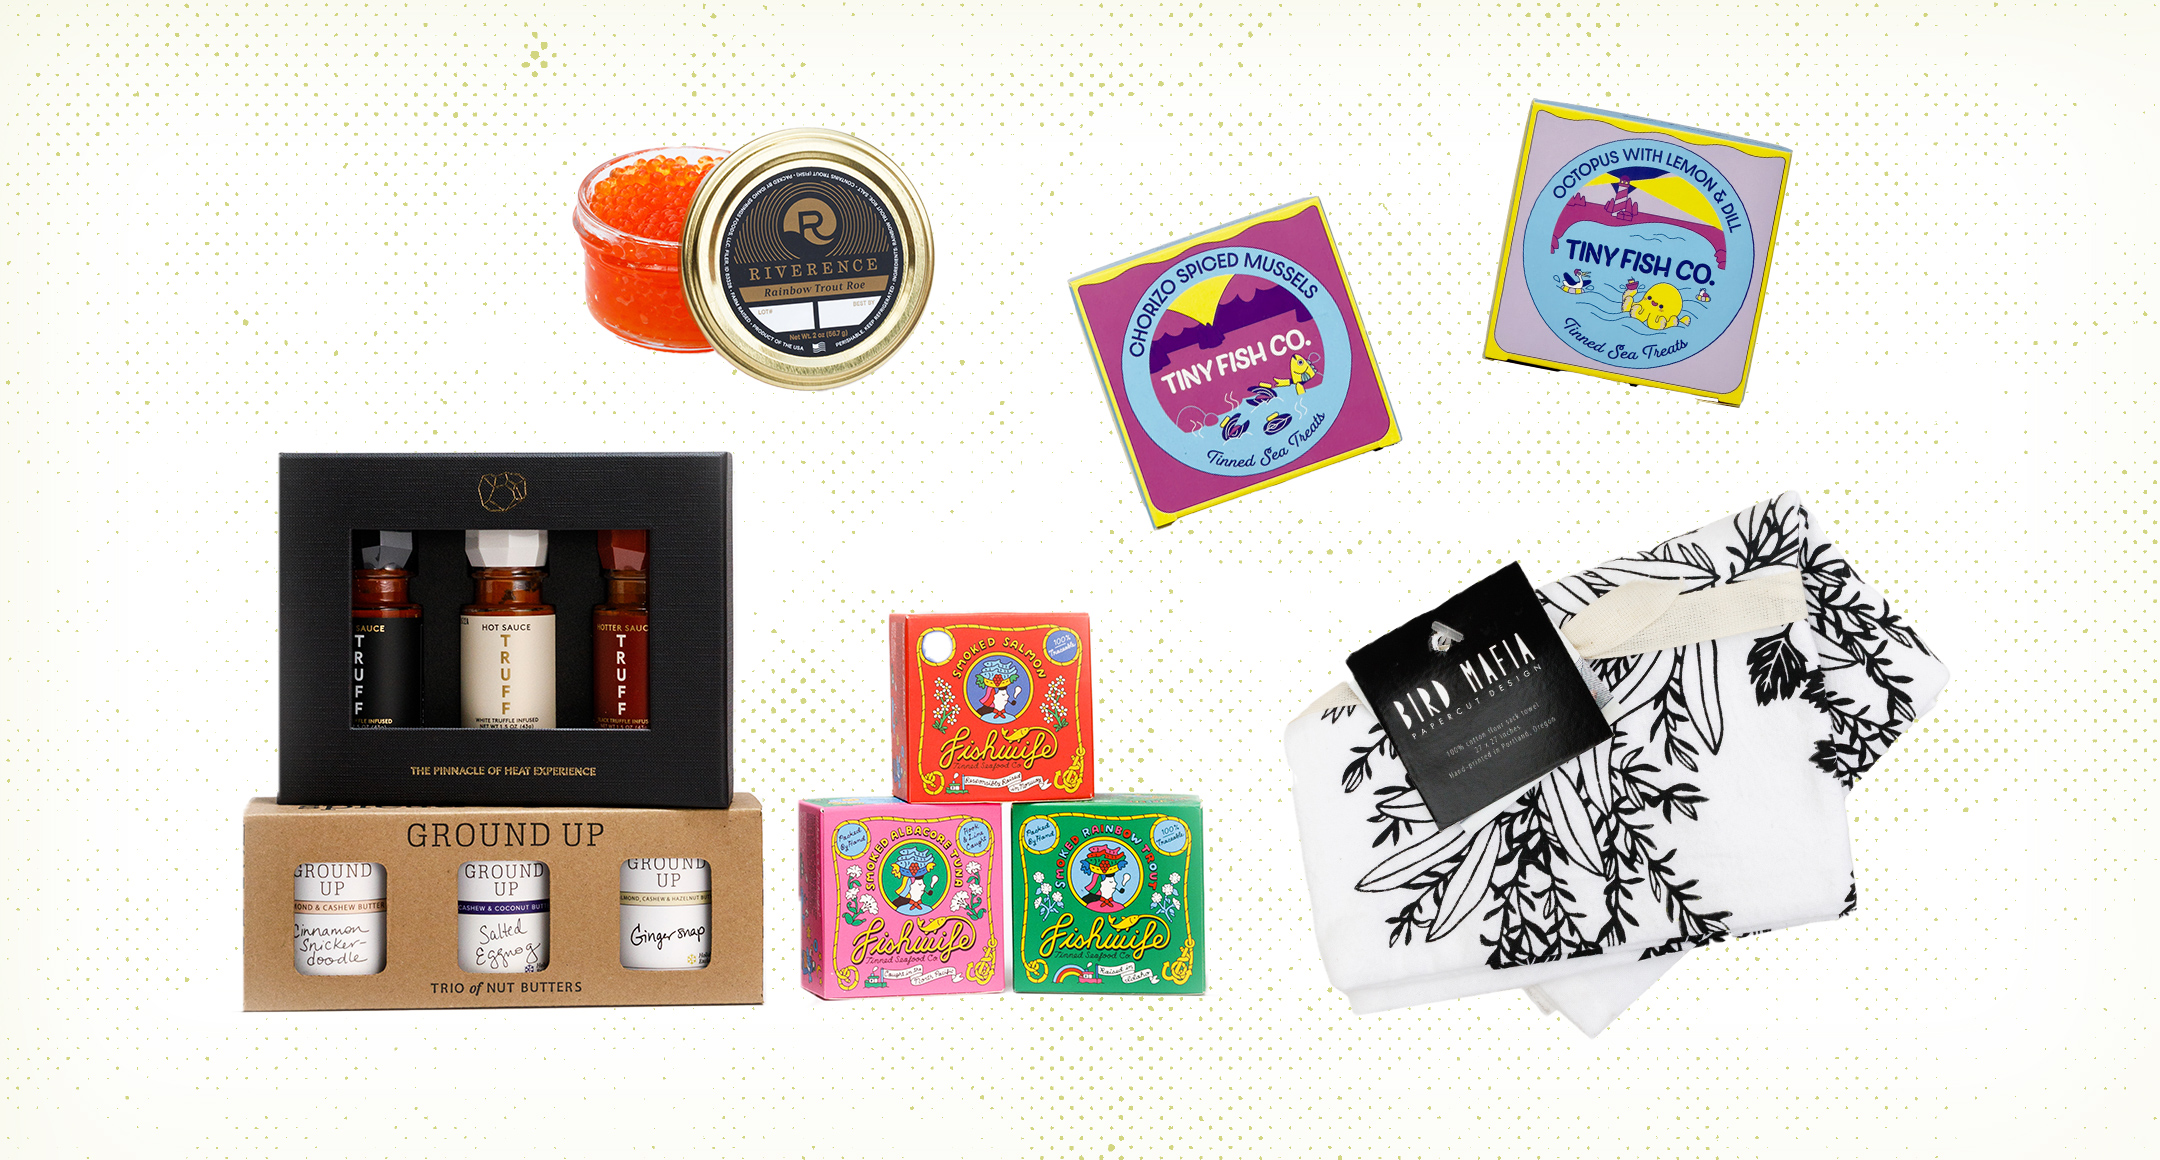 Food-related gifts, including caviar, tinned fish, a nut butter gift set, and a printed tea towel. 